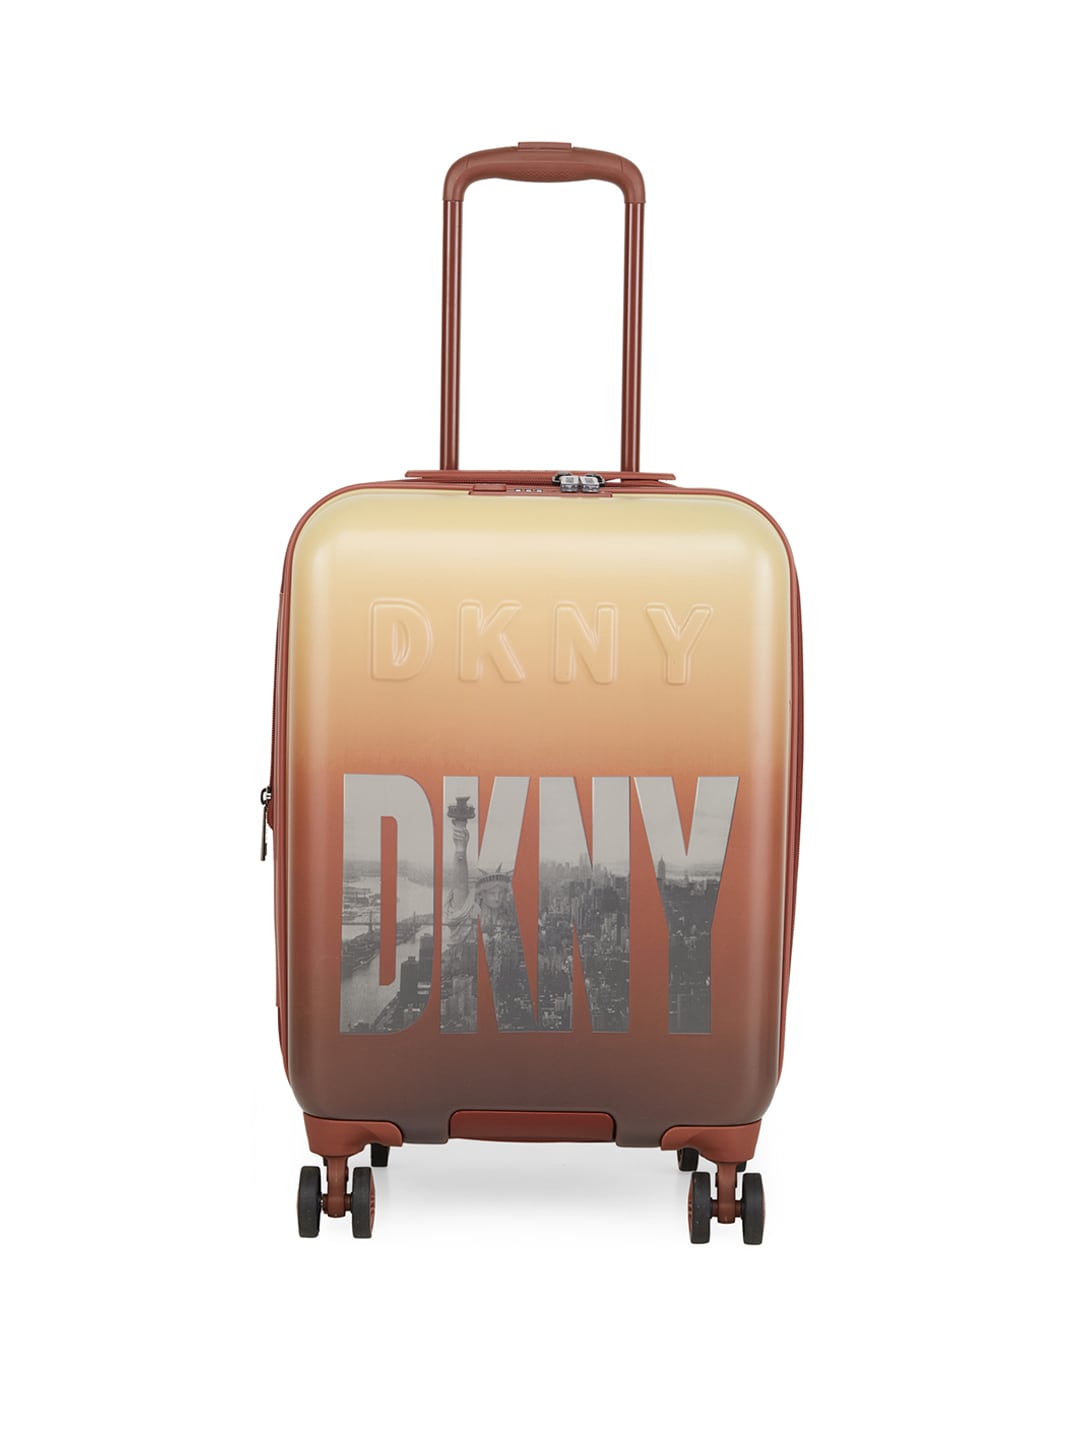 DKNY Bronze Street Smart Cabin Size Trolley Bag Price in India